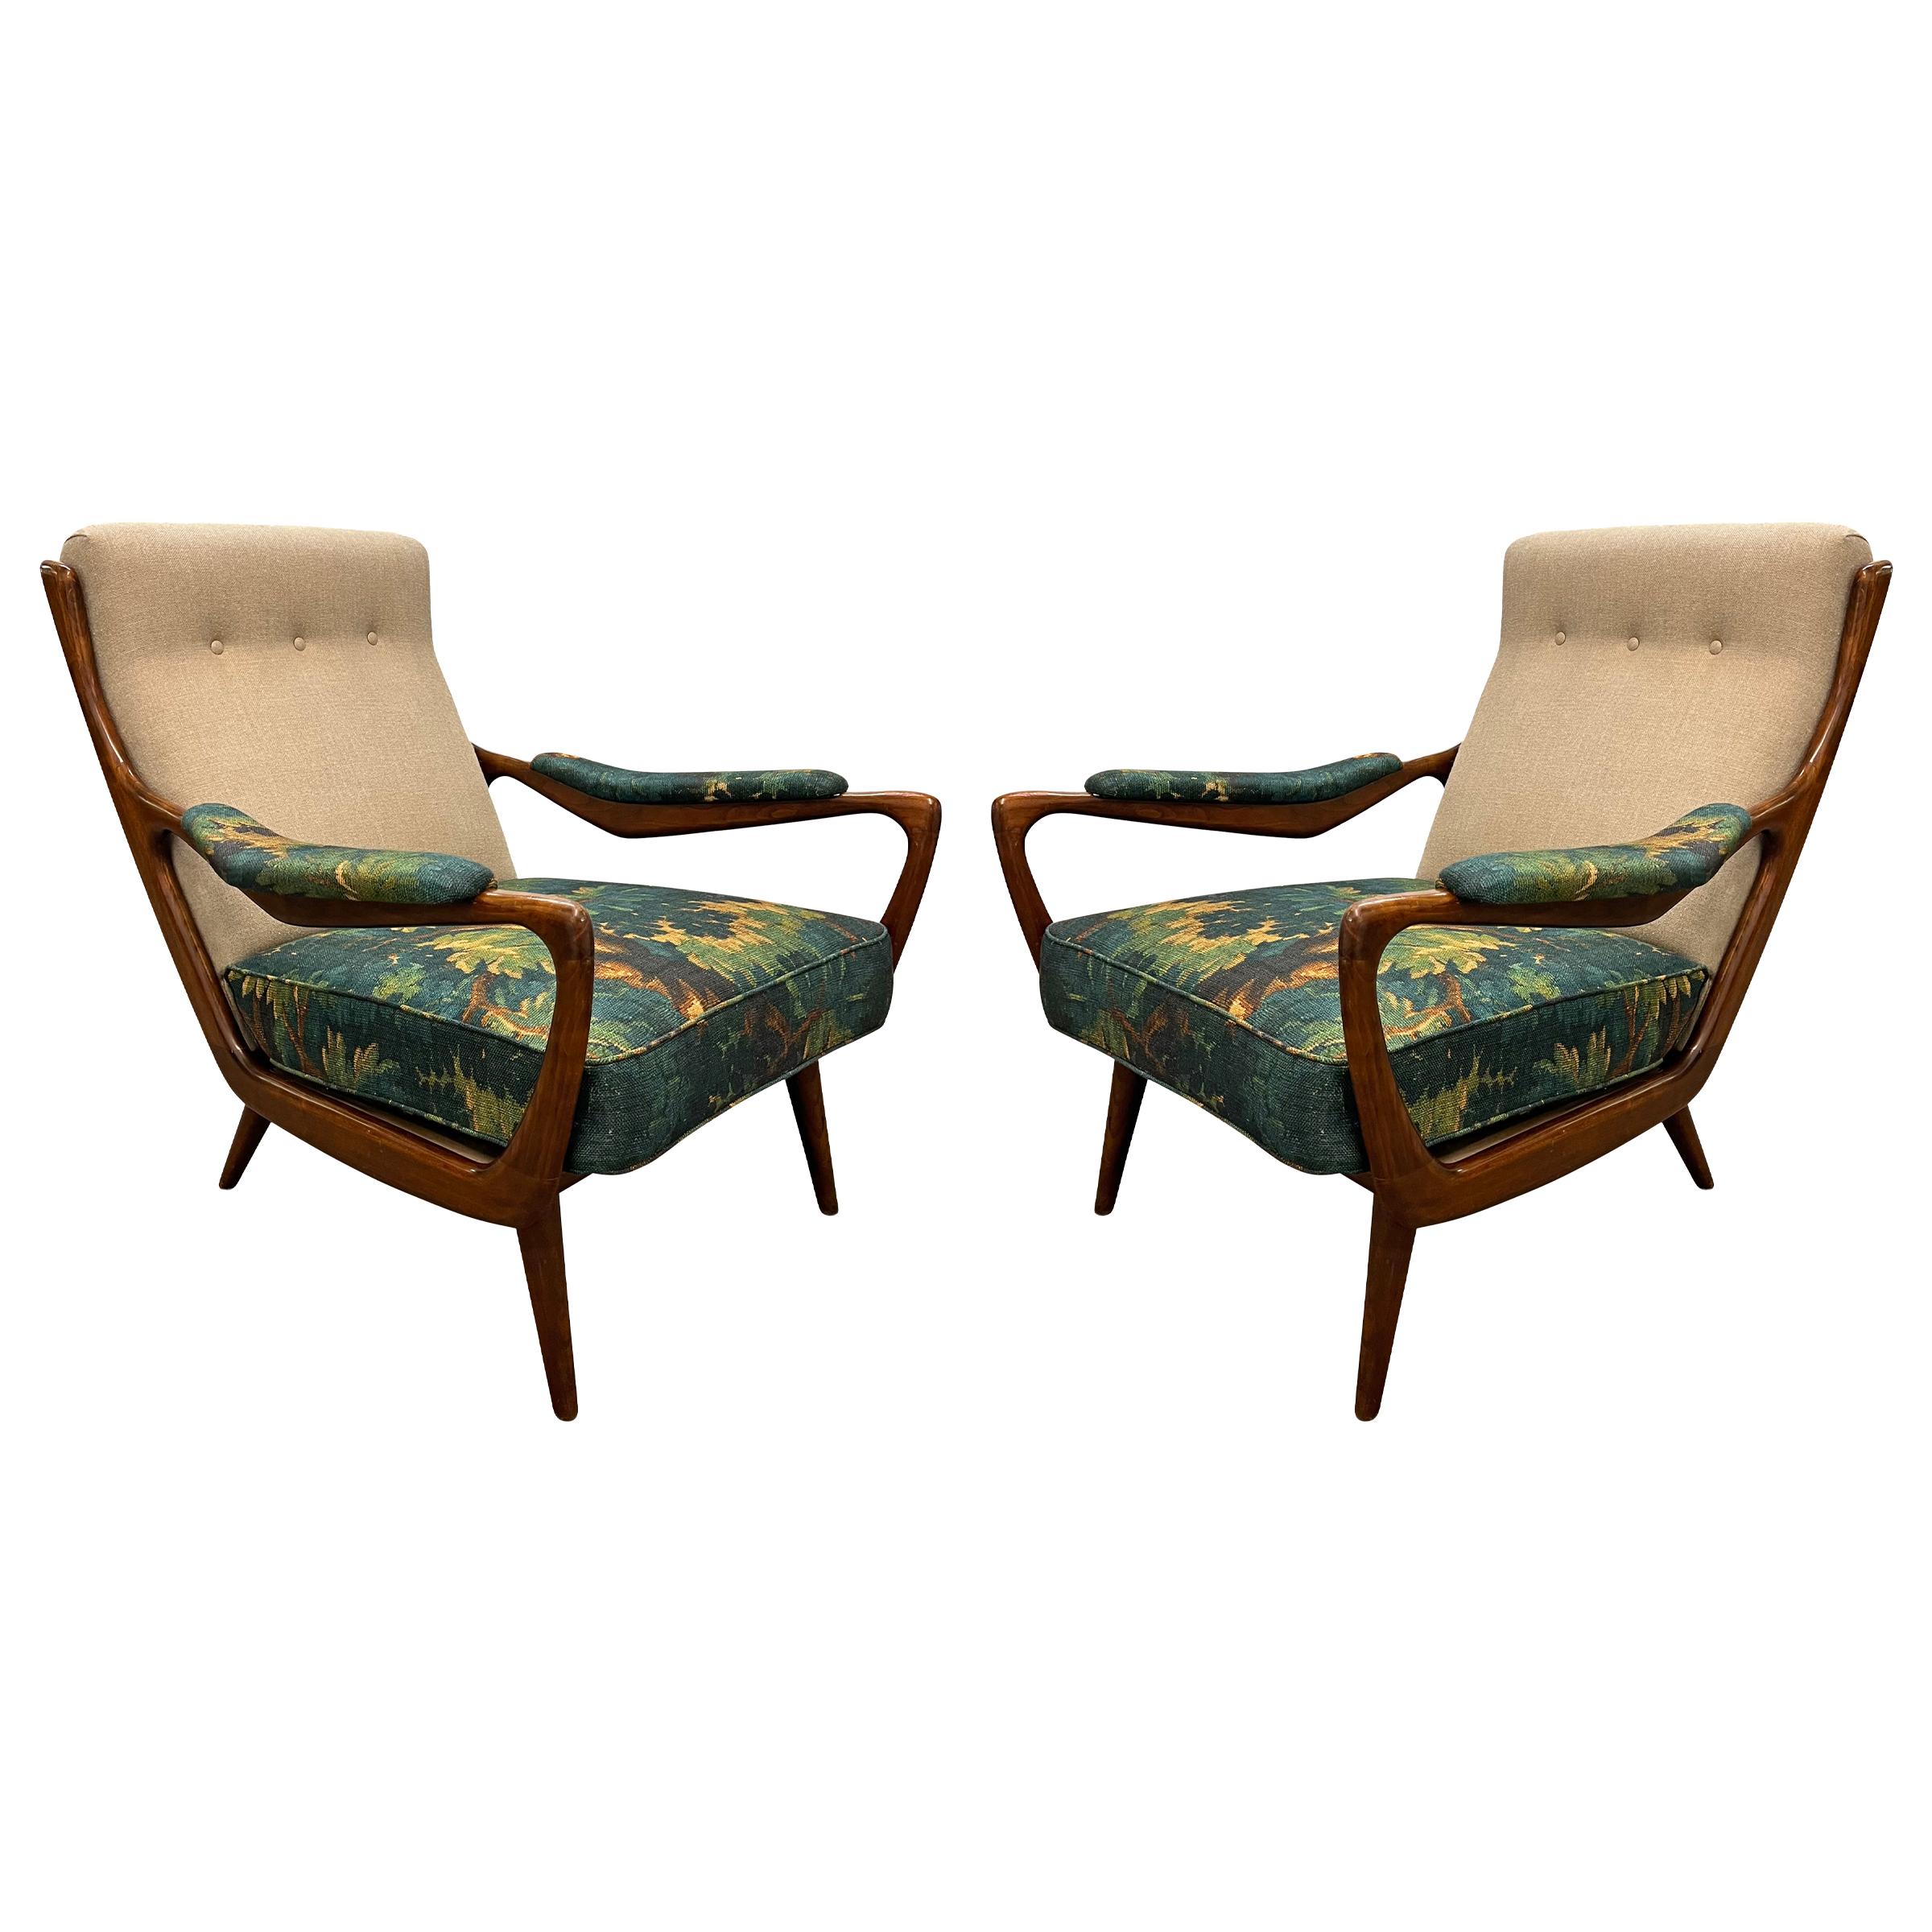 Mid-20th Century Set of Four 1950s Danish Modern Lounge Chairs For Sale